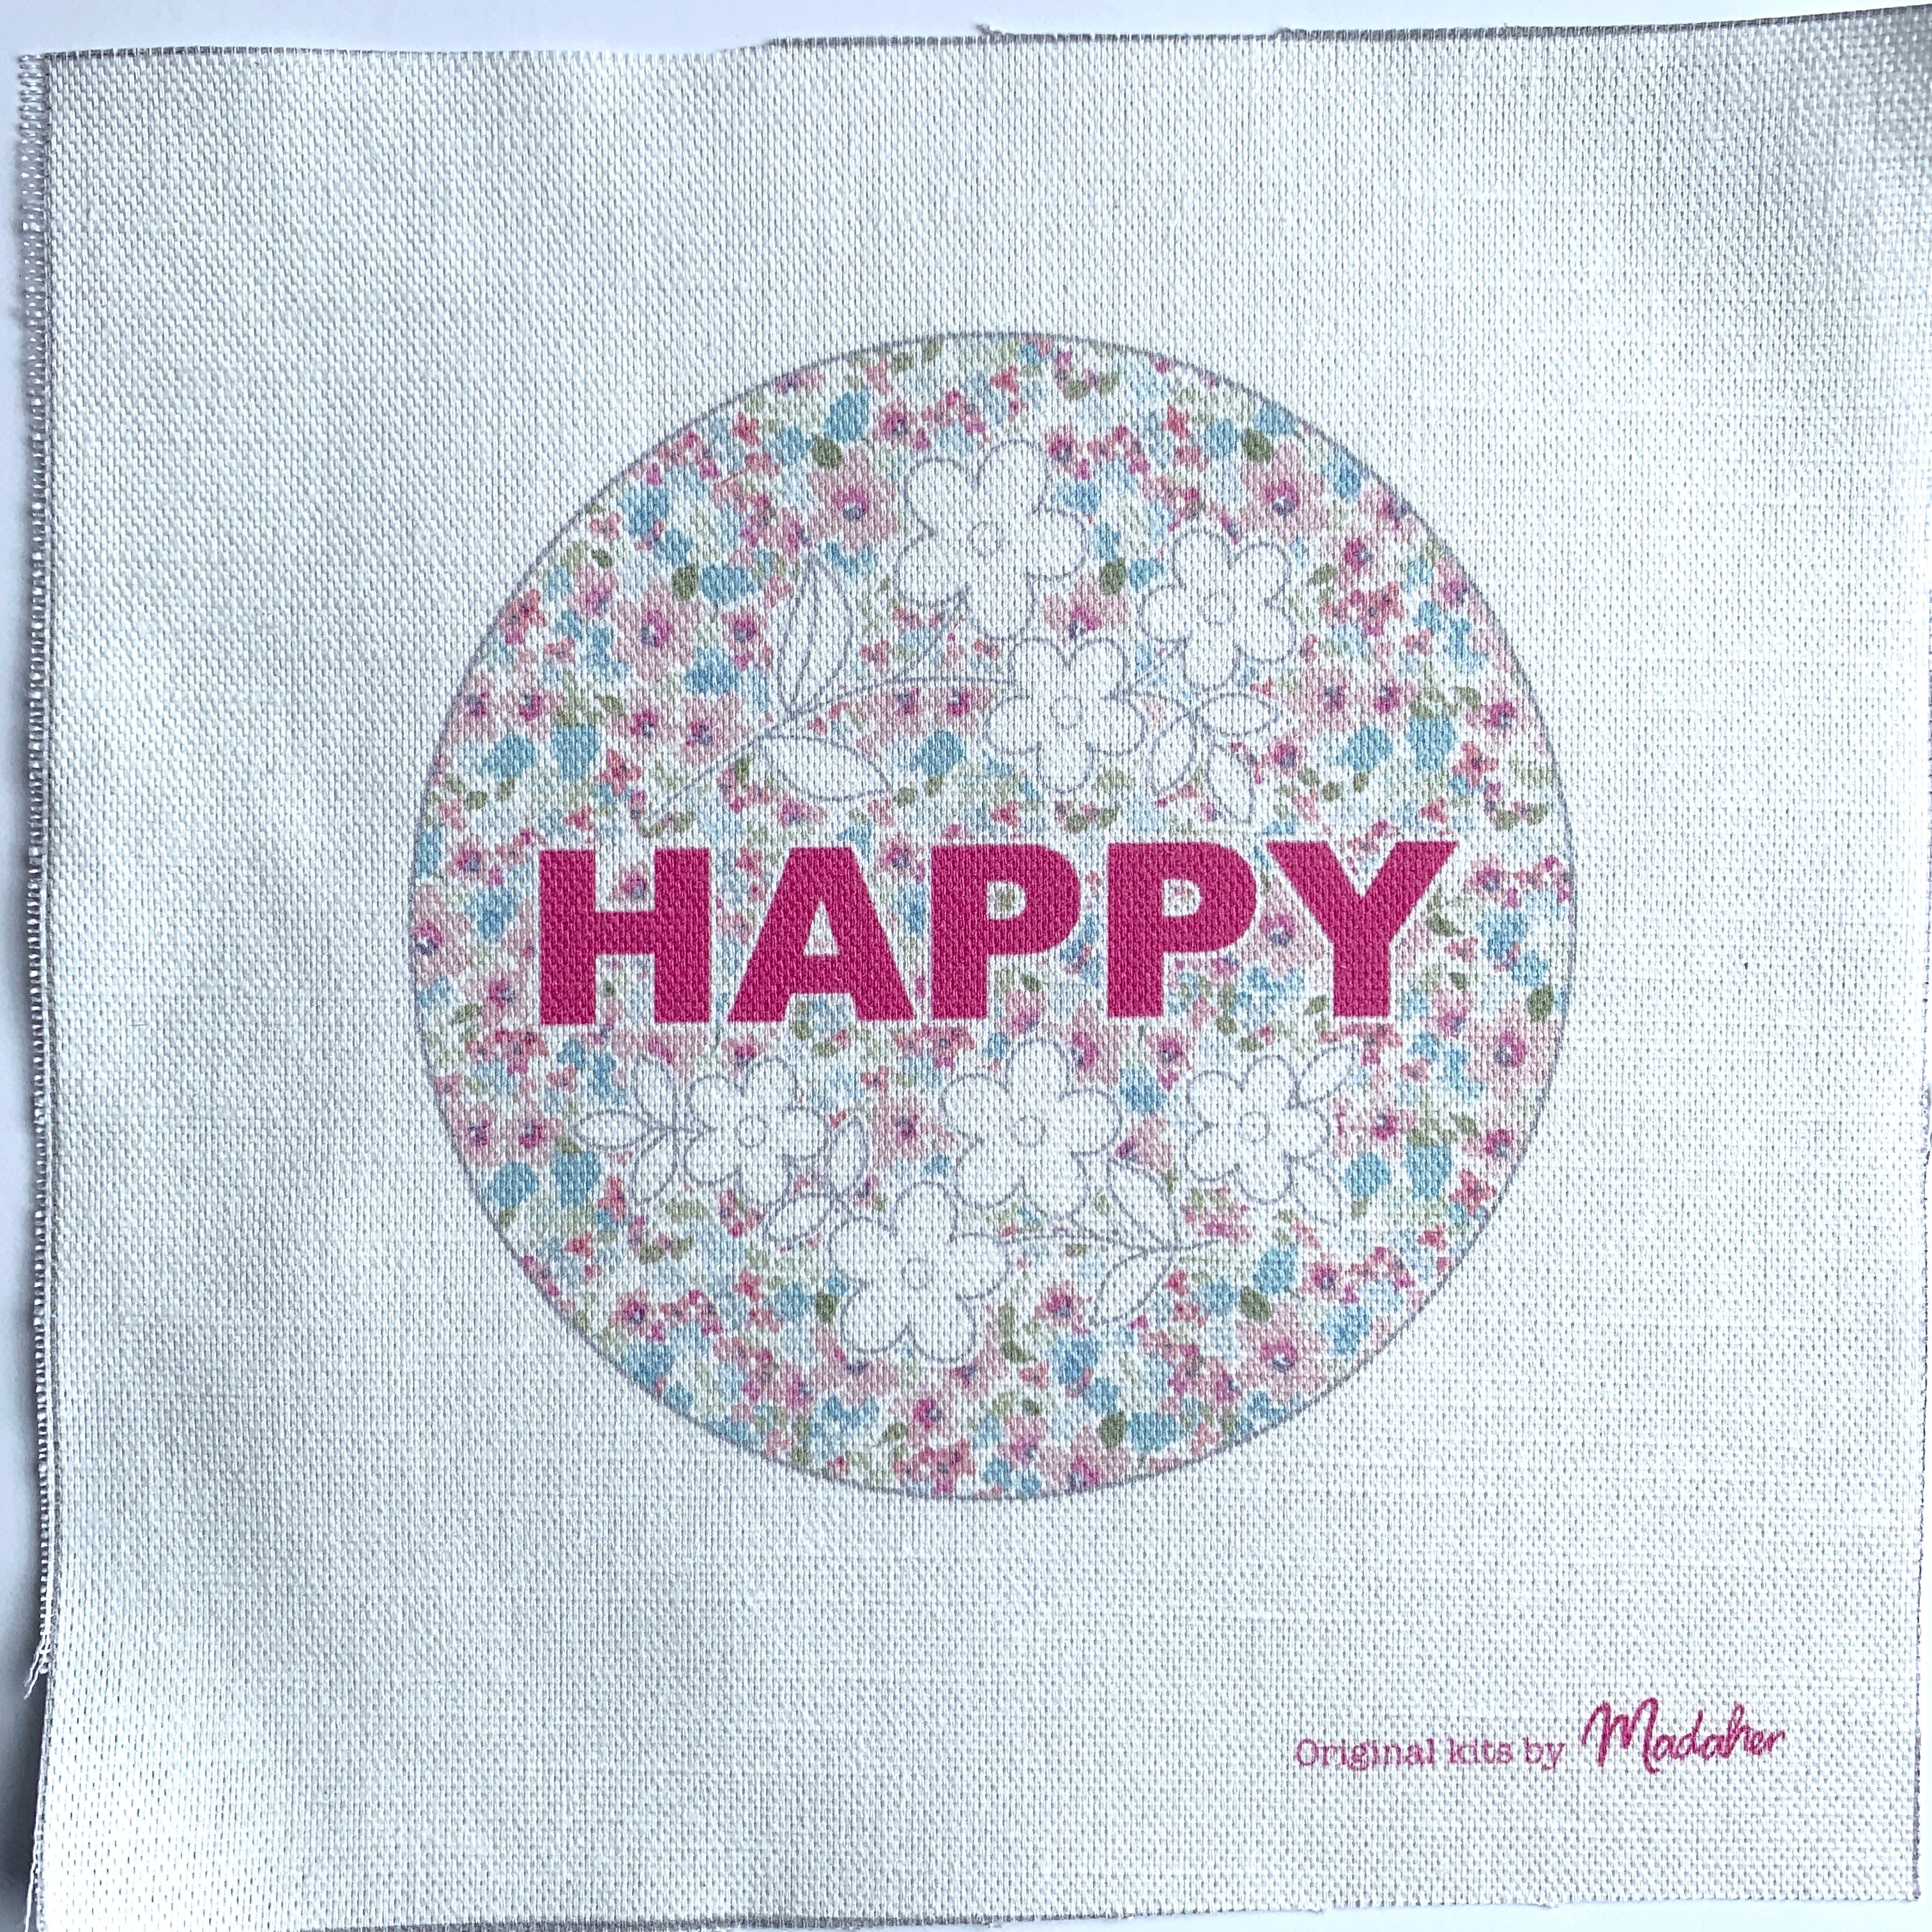 Positive Words 'Happy' Embroidery Panel.